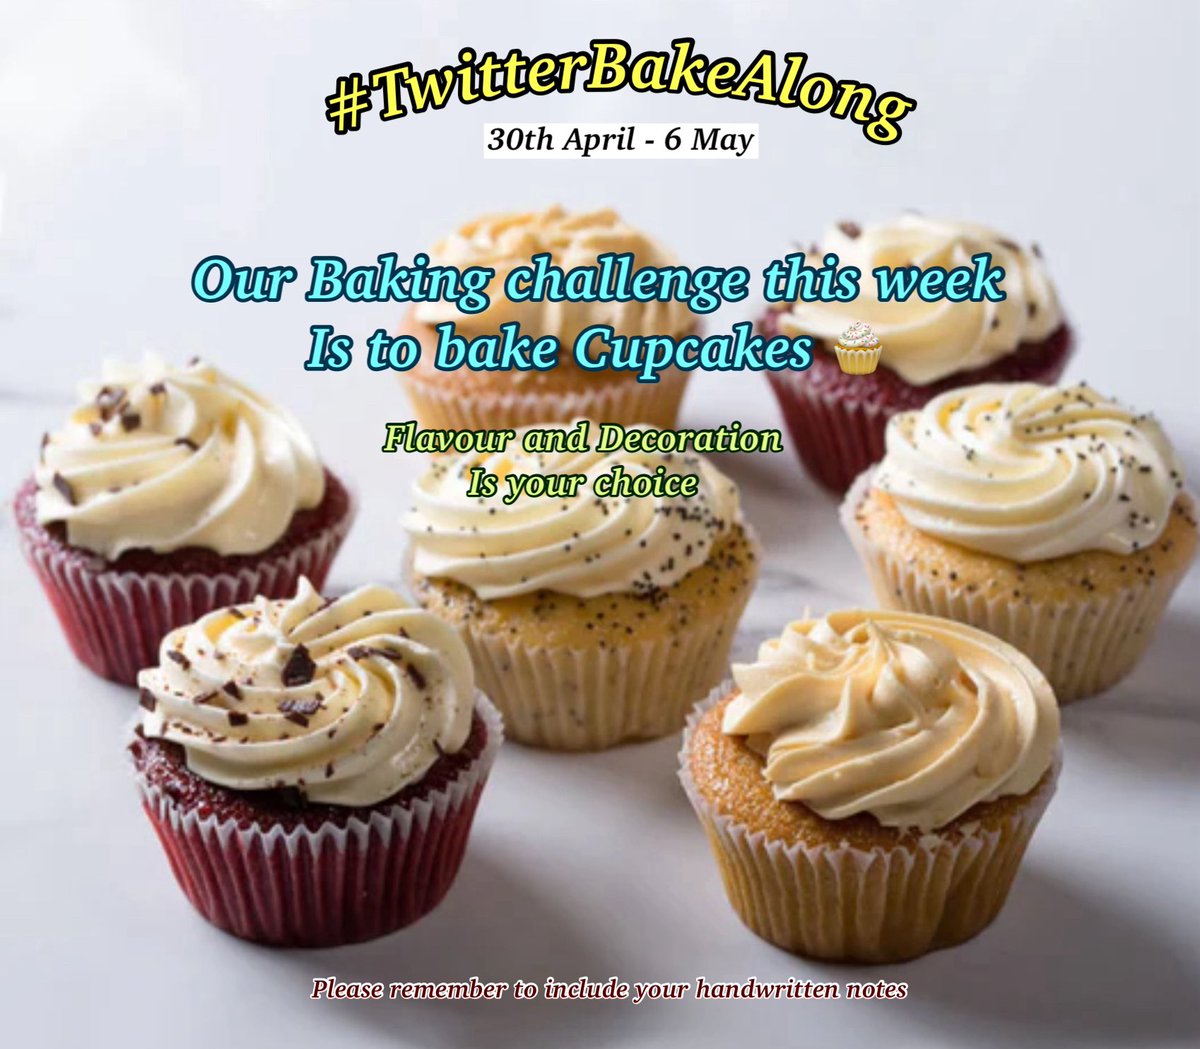 Our new #Baking challenge, is to bake #Cupcakes 🧁. You can choose the flavour and decorate, as you please. Remember to add your handwritten notes. #TwitterBakeAlong